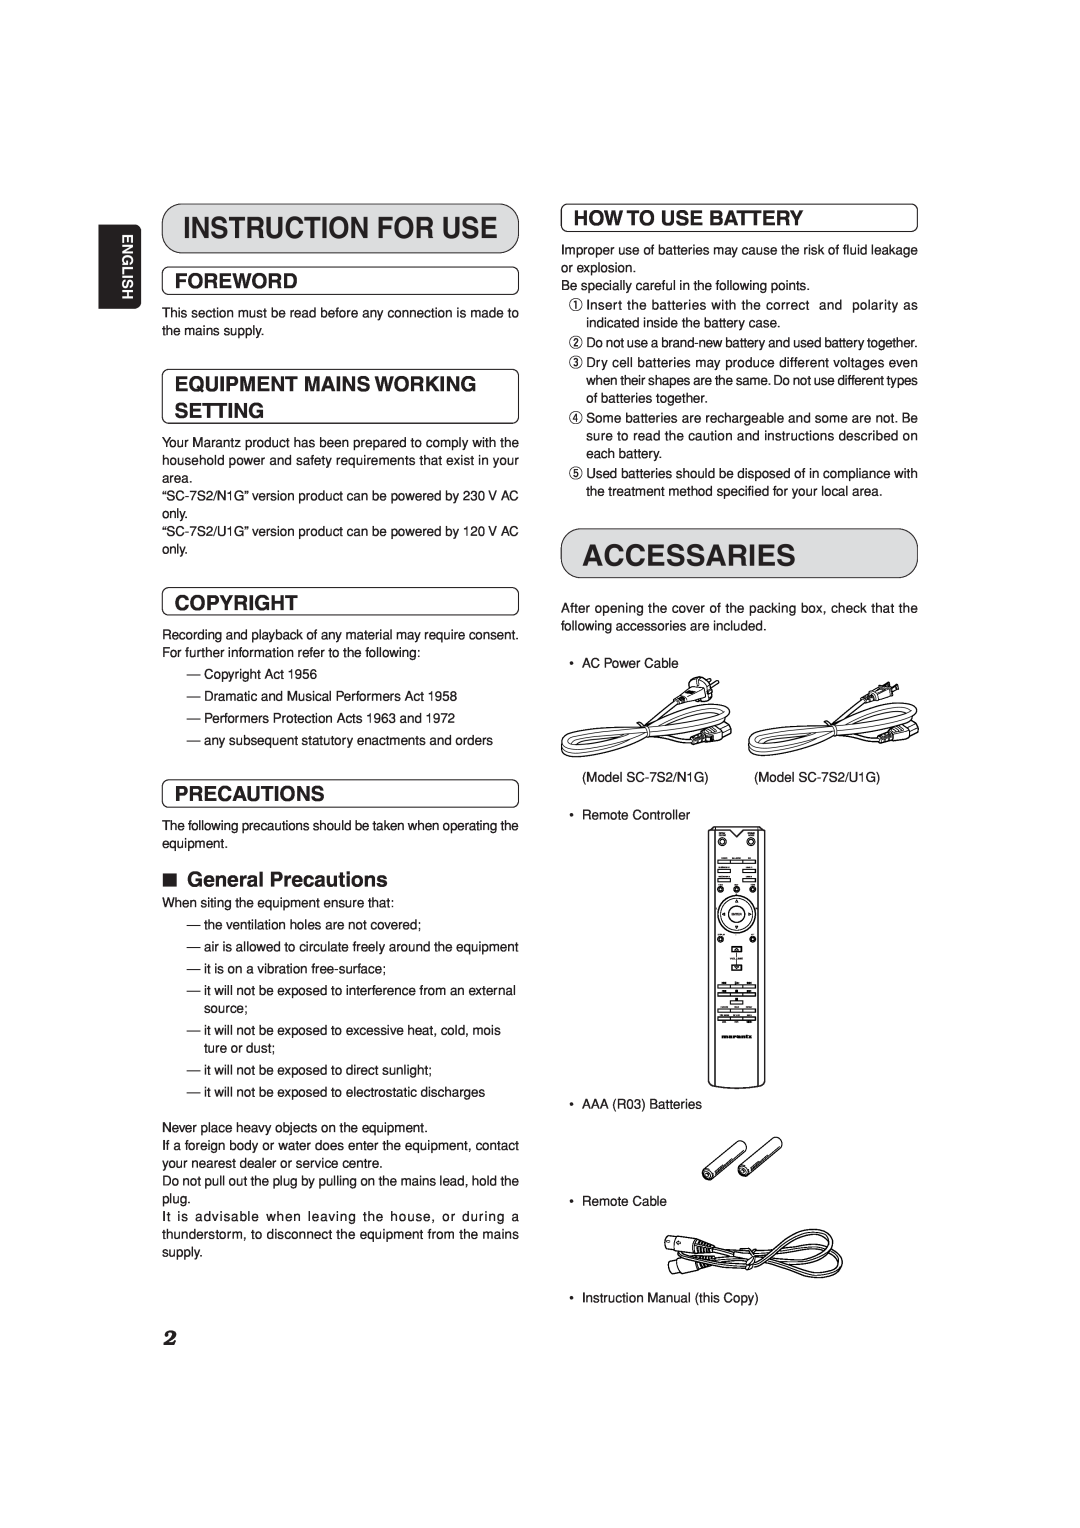 Marantz SC-7S2 manual Instruction For Use, Accessaries, Foreword, Equipment Mains Working Setting, Copyright, Precautions 